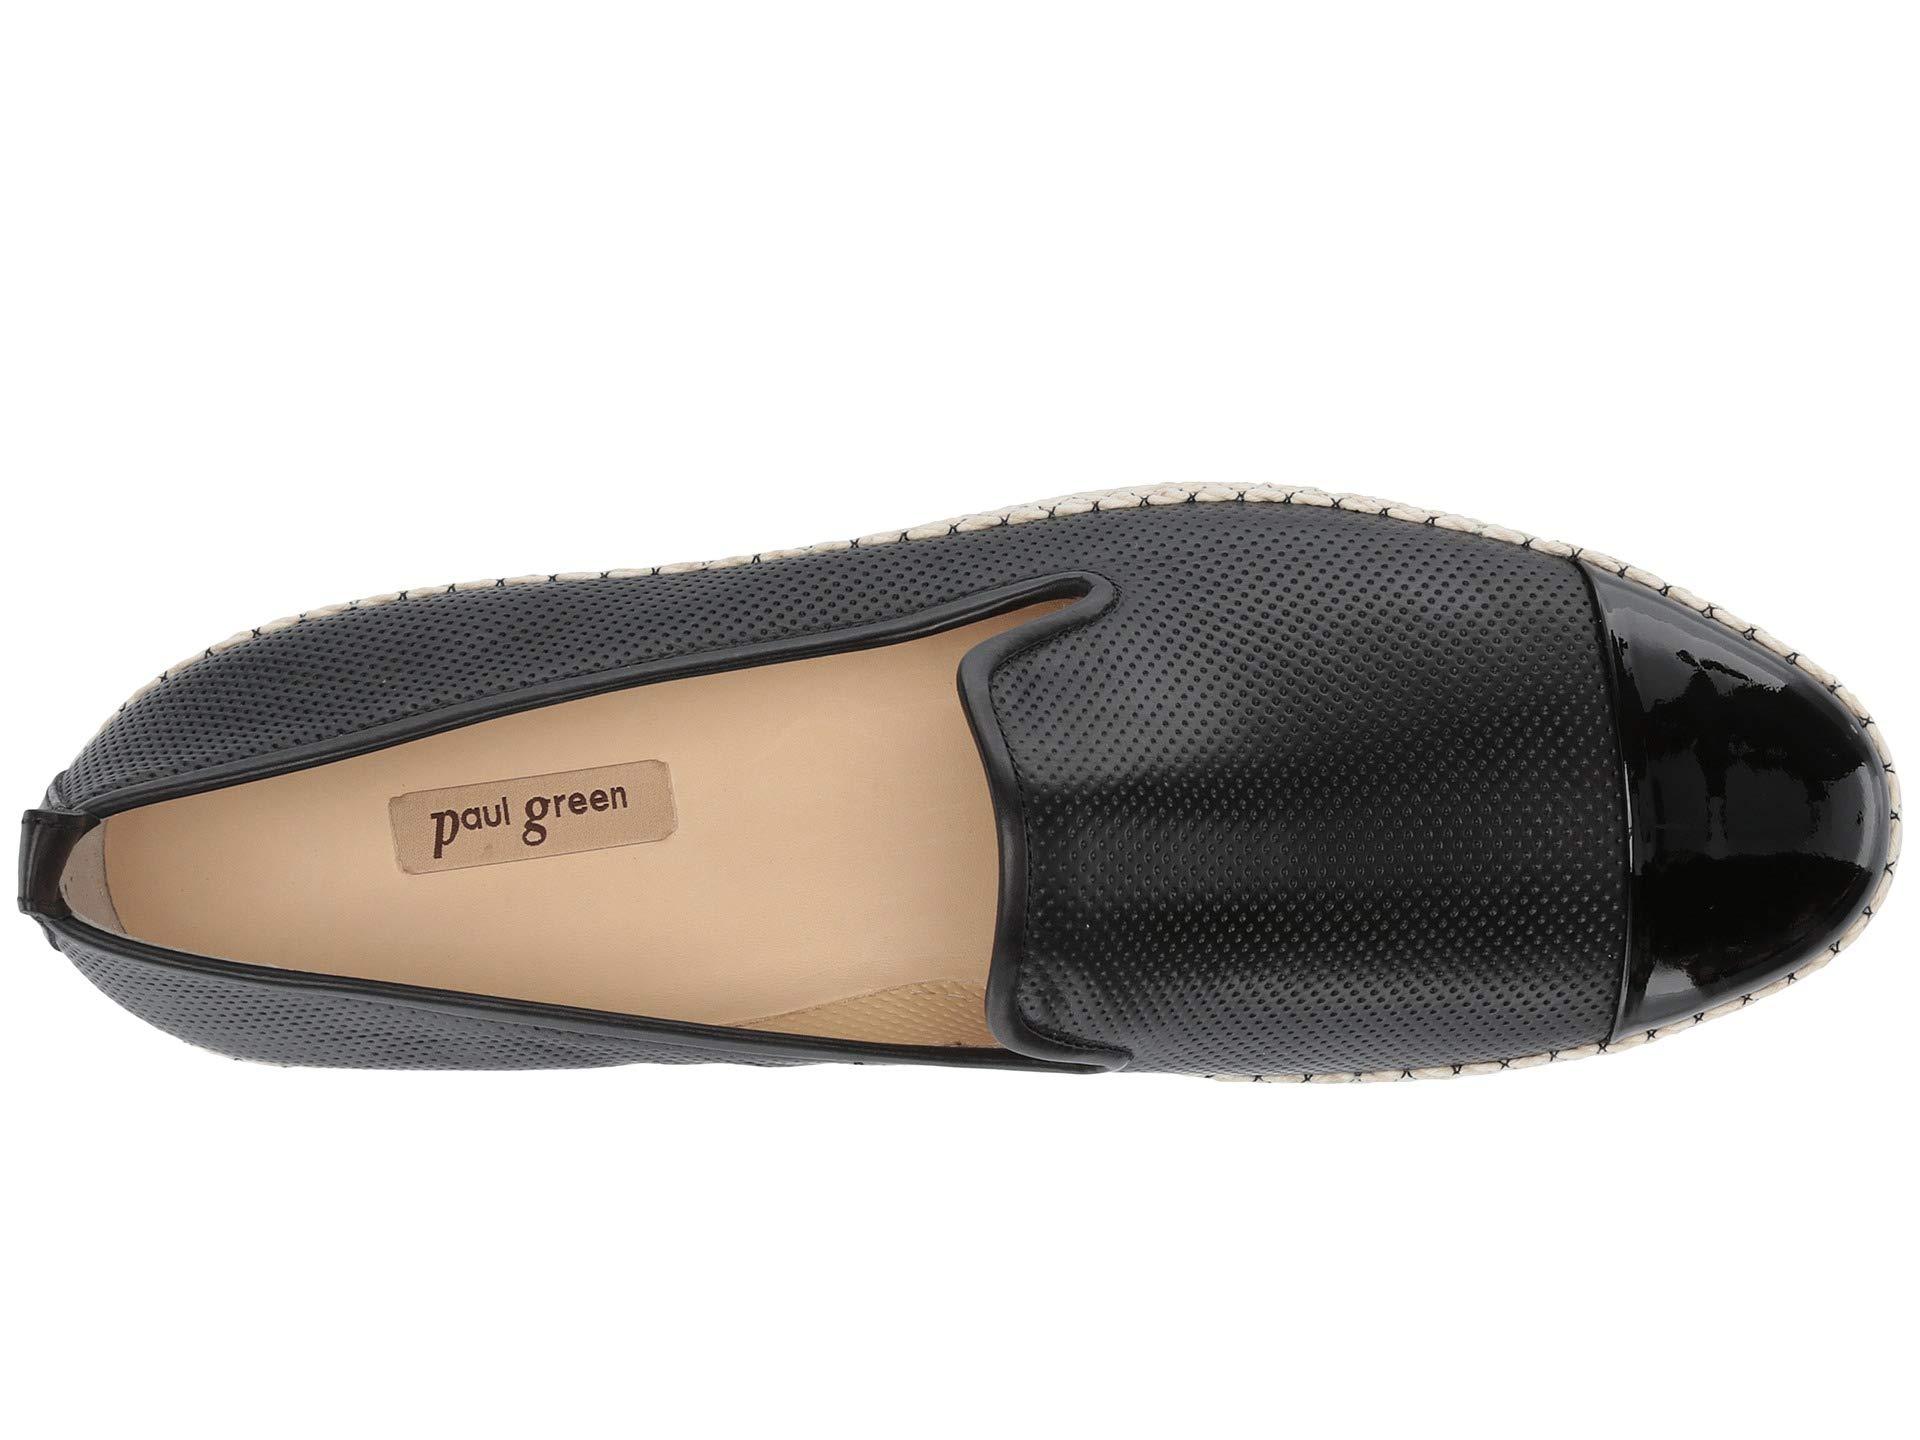 Paul Green Leather Posh Loafer in Black 